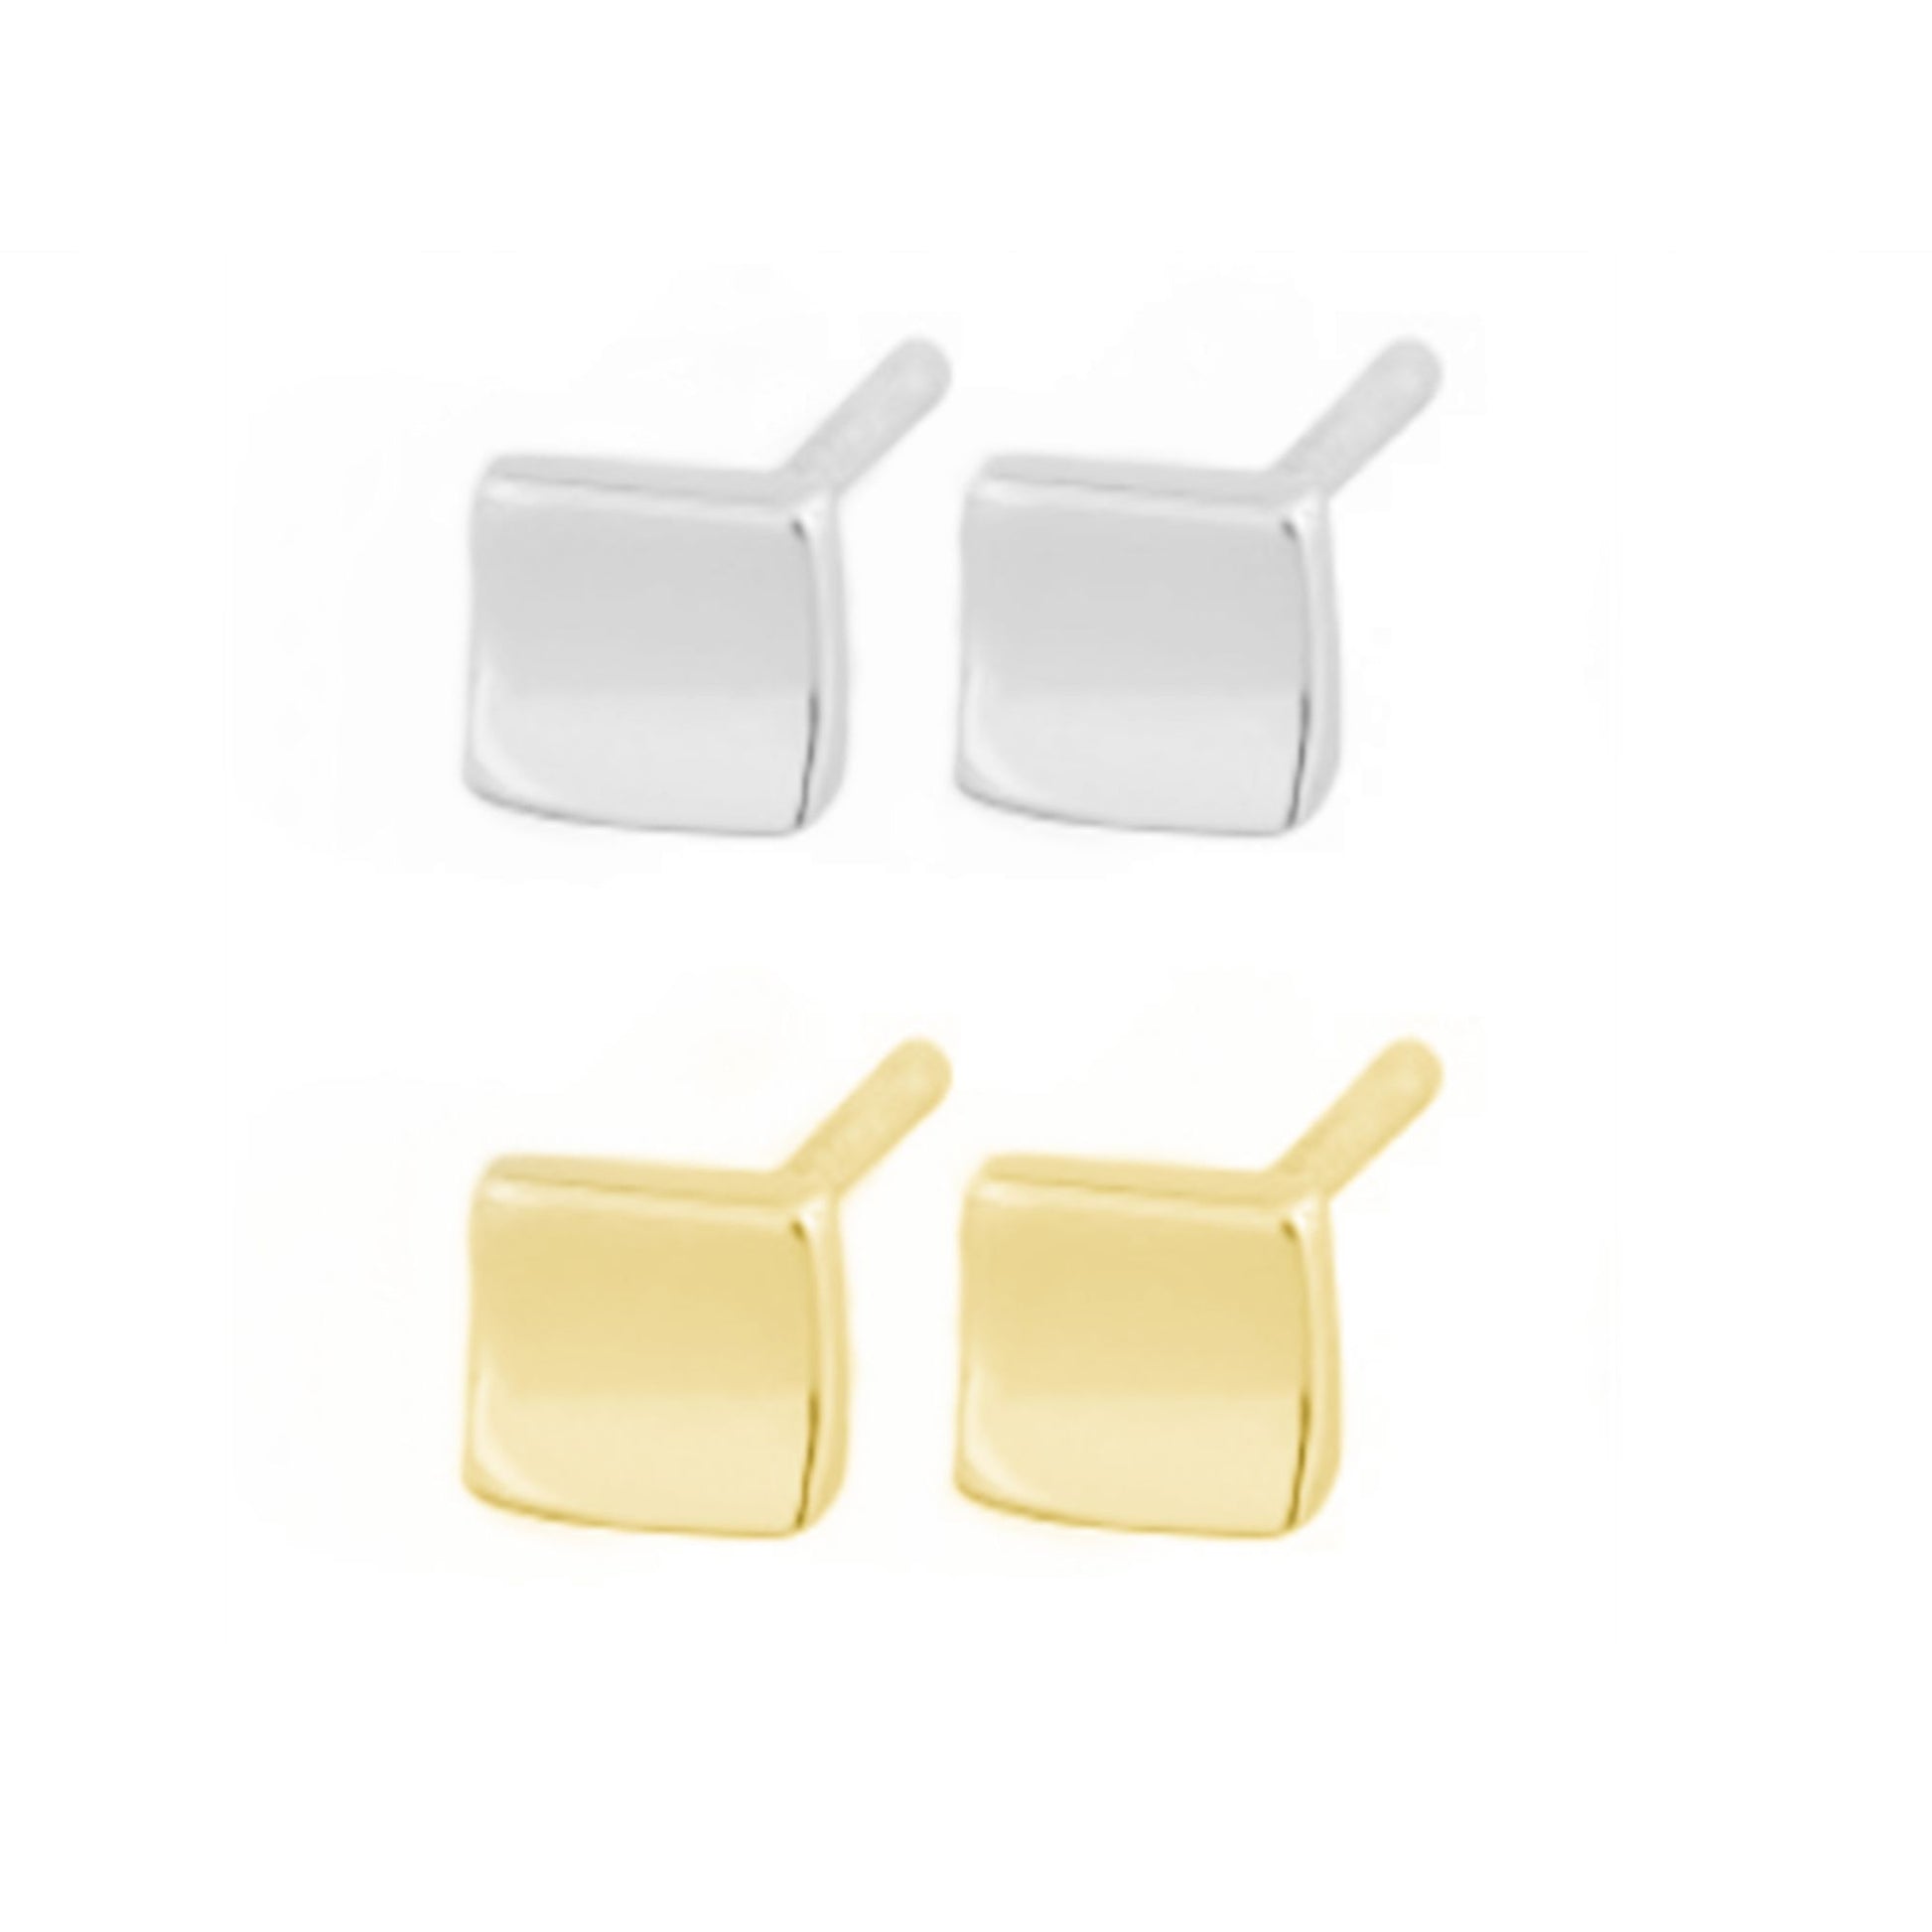 Sterling Silver Mini Bent Concaved Cube Square Stud Earrings 2 Tones - sugarkittenlondon